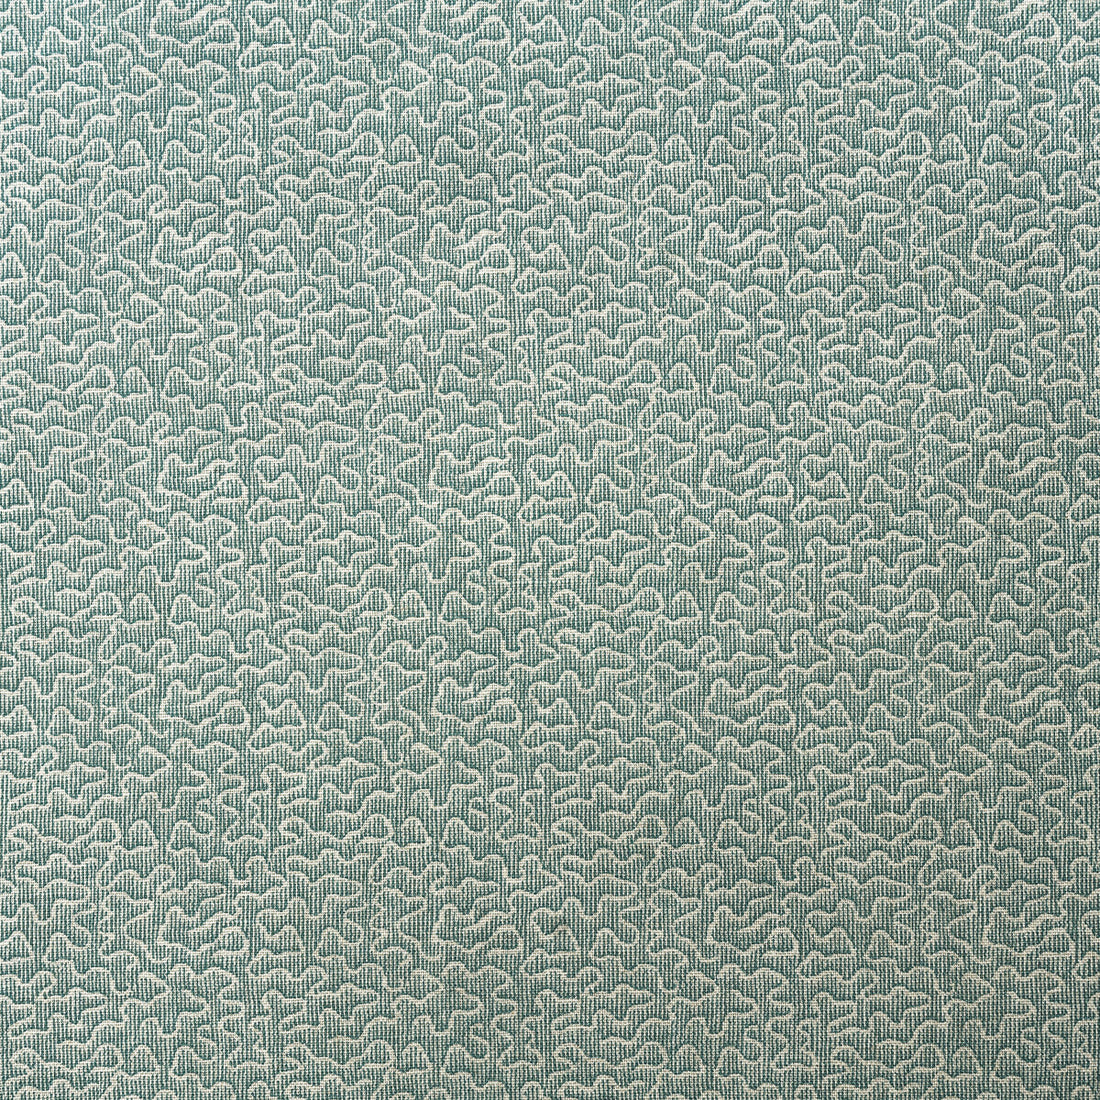 Pollen fabric in turquoise color - pattern AM100383.13.0 - by Kravet Couture in the Andrew Martin Garden Path collection